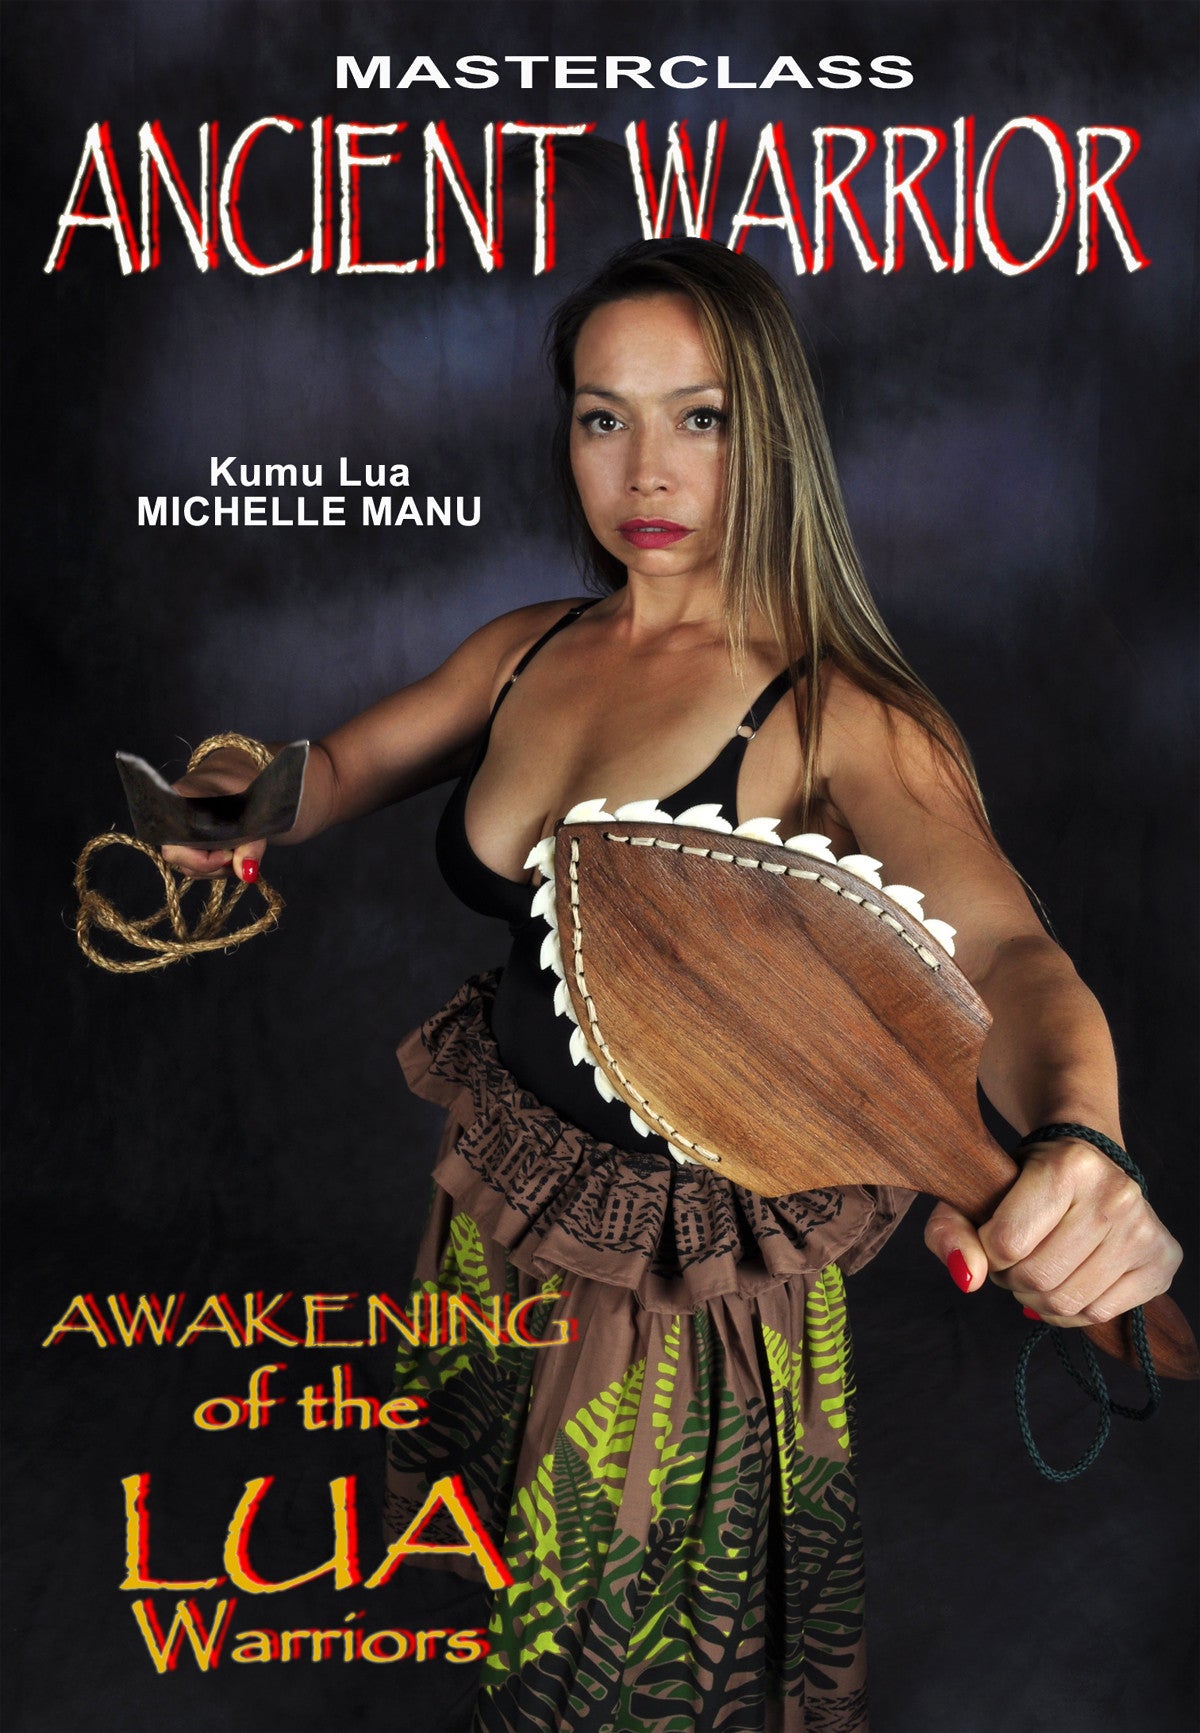 Awakening Of The LUA Warriors DVD by Michelle Manu - Budovideos Inc